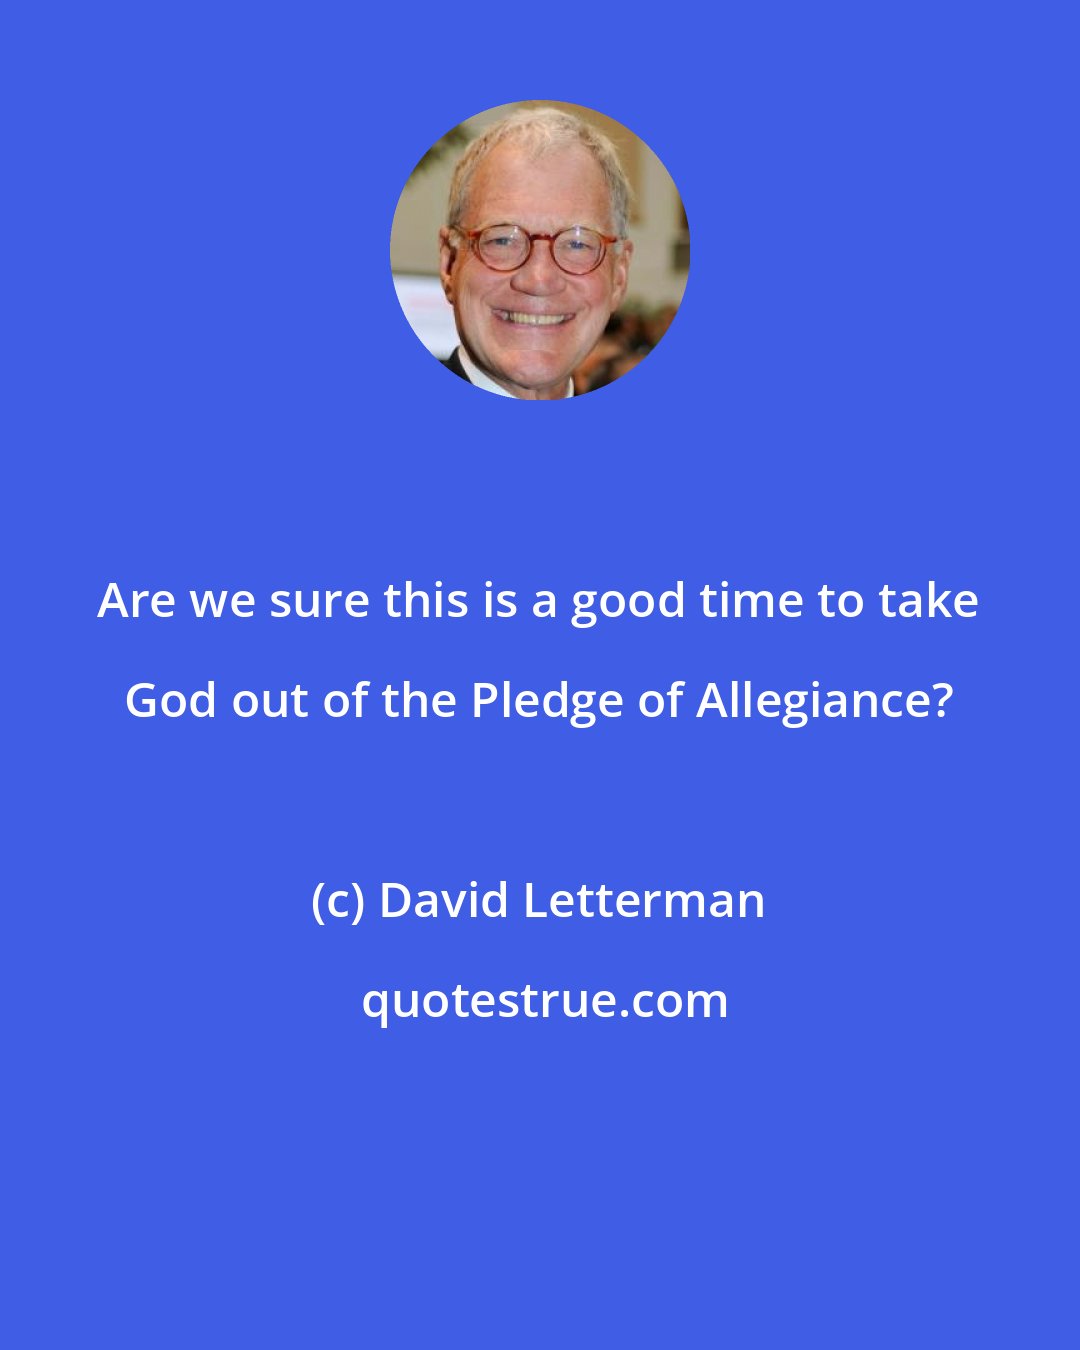 David Letterman: Are we sure this is a good time to take God out of the Pledge of Allegiance?